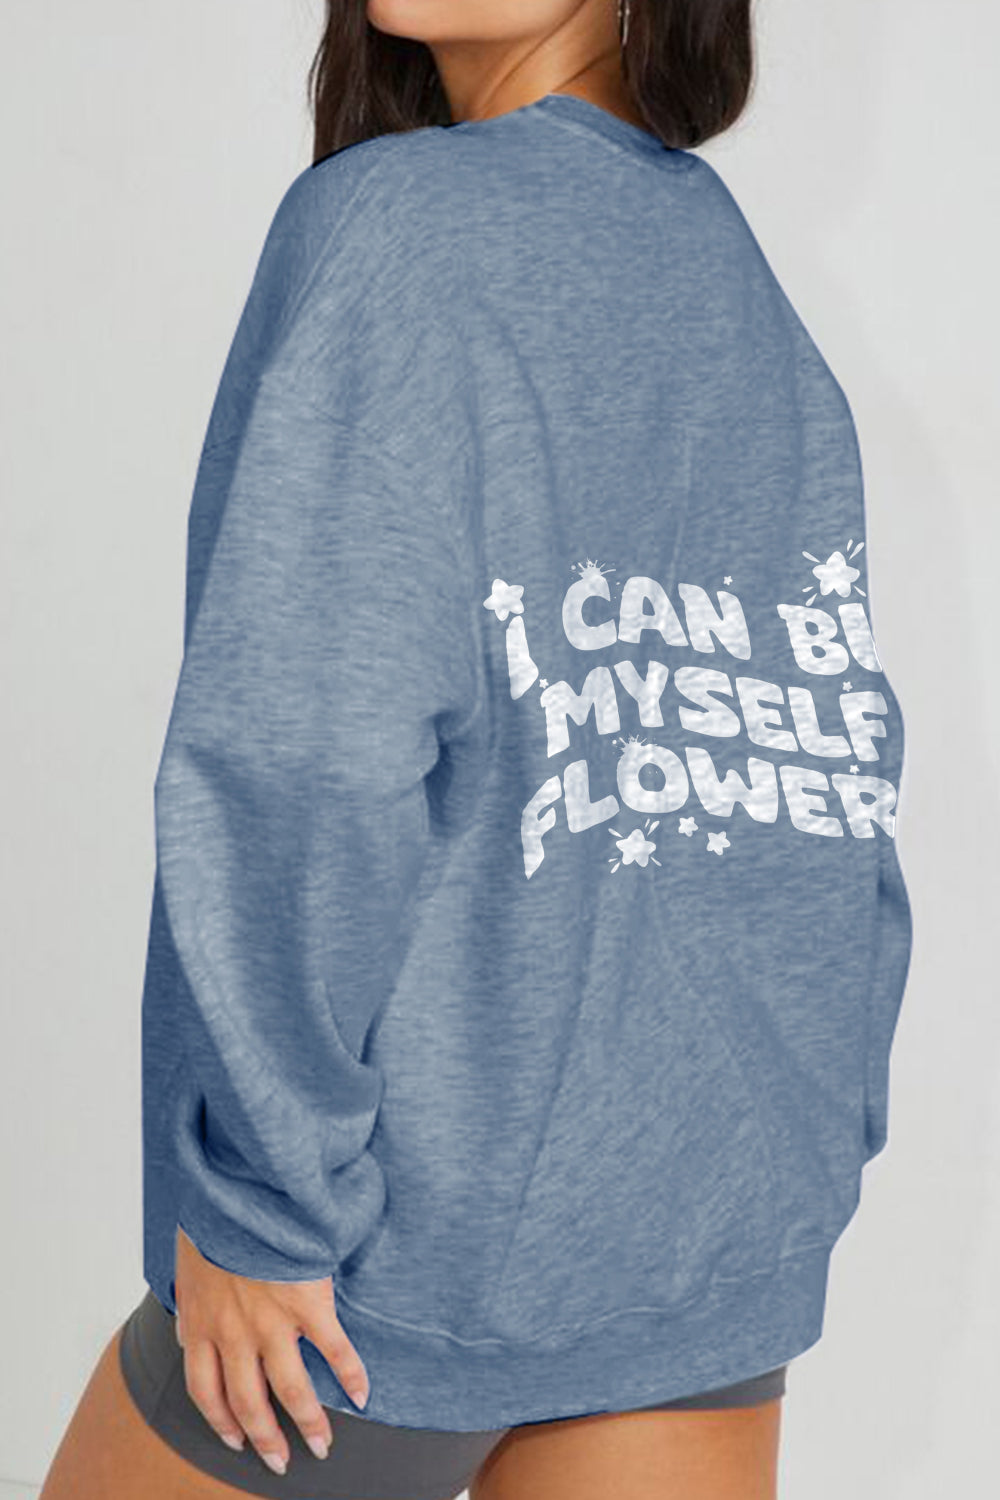 Full Size I CAN BUY MYSELF FLOWERS Graphic Sweatshirt - T-Shirts - Shirts & Tops - 8 - 2024